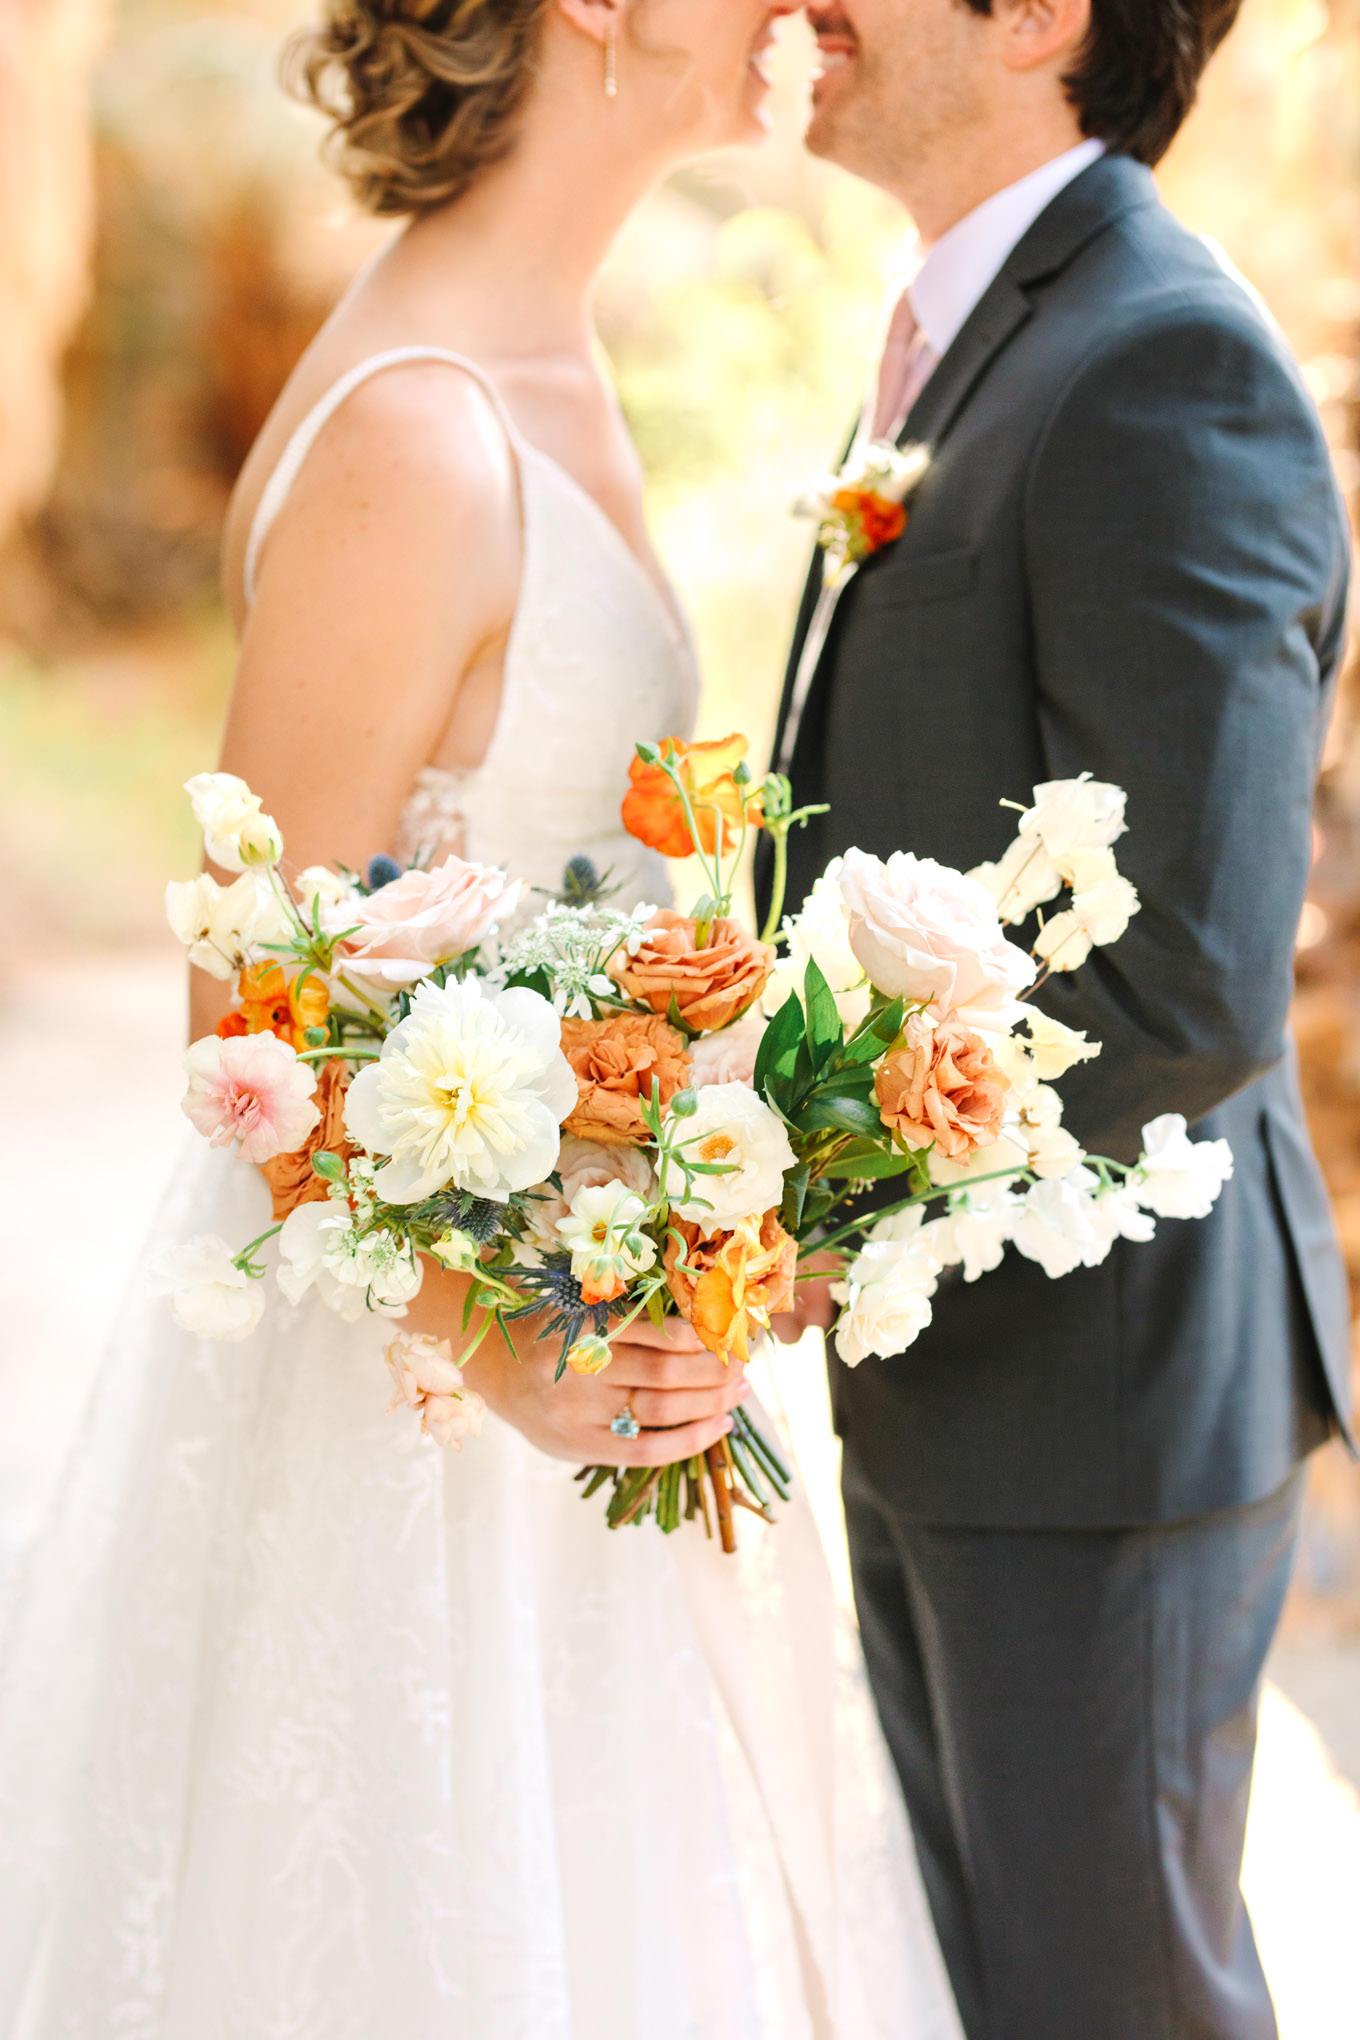 Colorful wedding bouquet detail | Living Desert Zoo & Gardens wedding with unique details | Elevated and colorful wedding photography for fun-loving couples in Southern California |  #PalmSprings #palmspringsphotographer #gardenwedding #palmspringswedding  Source: Mary Costa Photography | Los Angeles wedding photographer 